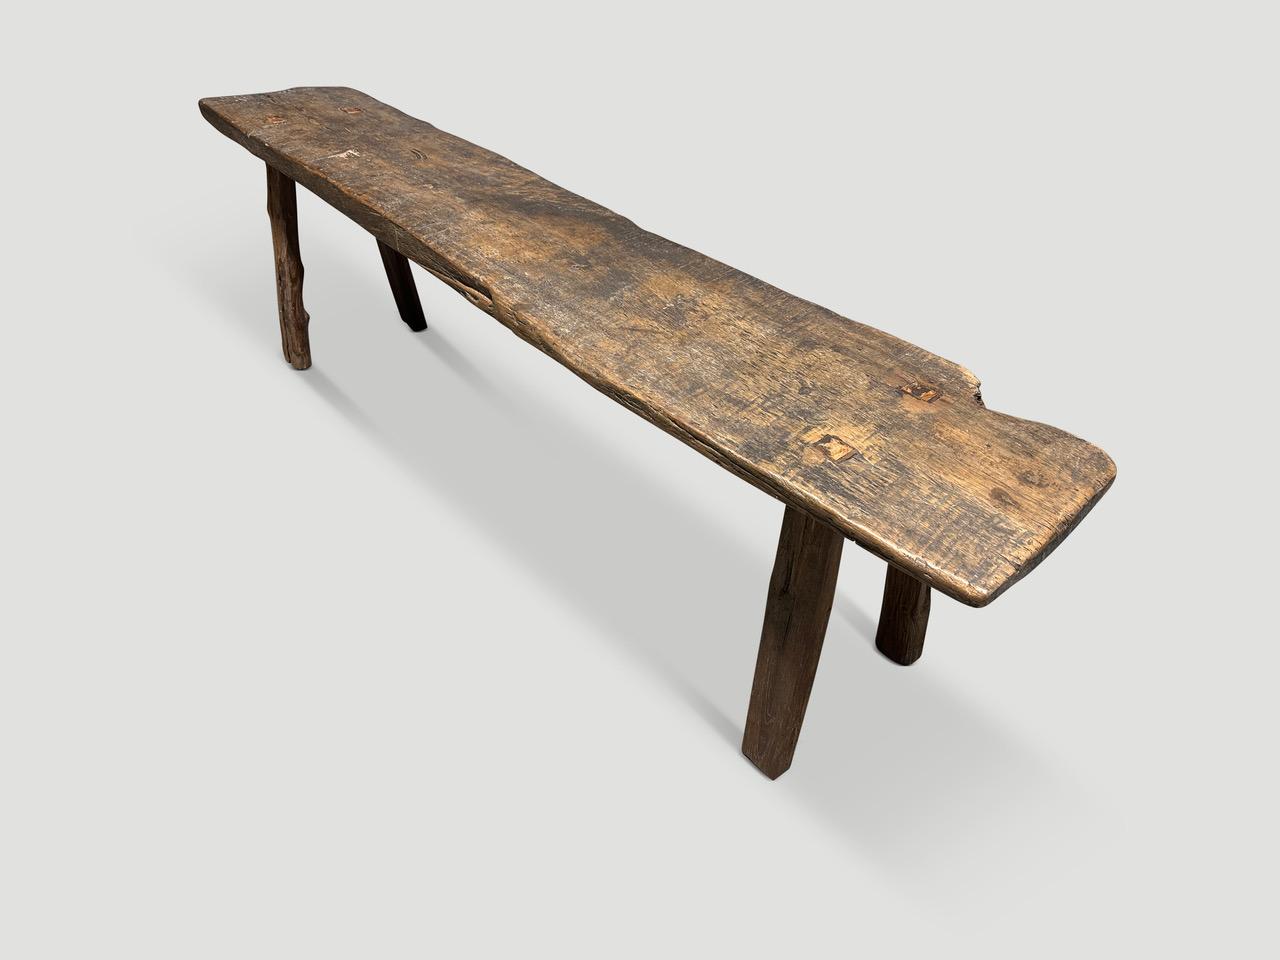 Antique bench hand made from a single panel of teak wood with lovely patina.

This bench was hand made in the spirit of Wabi-Sabi, a Japanese philosophy that beauty can be found in imperfection and impermanence. It is a beauty of things modest and